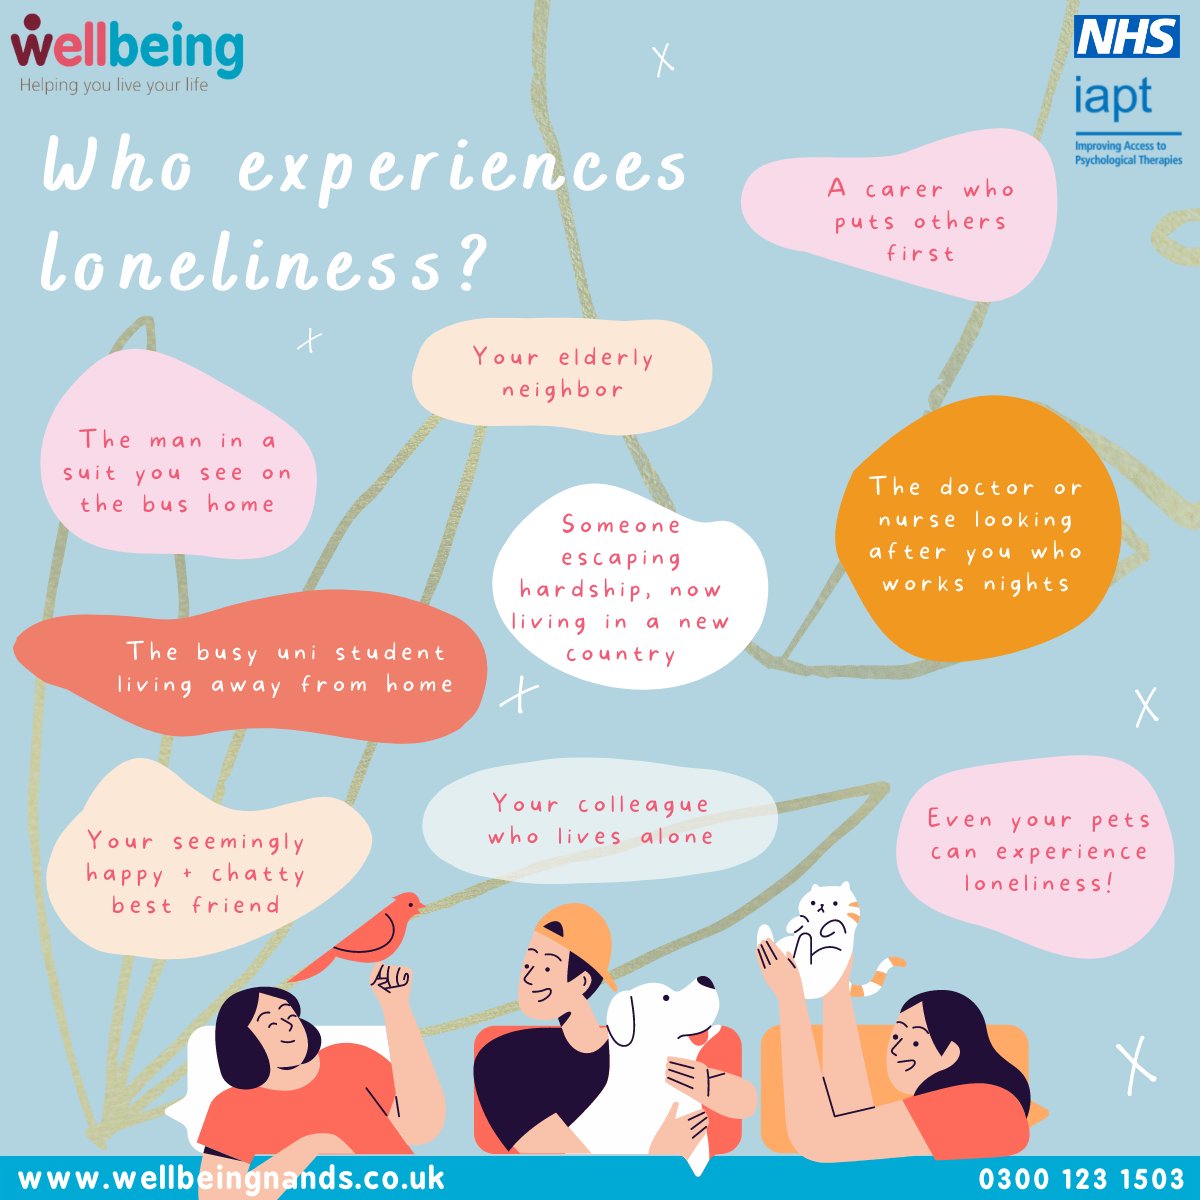 This week is Loneliness Awareness Week (12th-18th June)

For details on any of our FREE socials events, please visit our website:
wellbeingnands.co.uk/norfolk/commun… 

# Lonelinessawarenessweek #nhs #wellbeing #talkingtherapies #support #socialevents